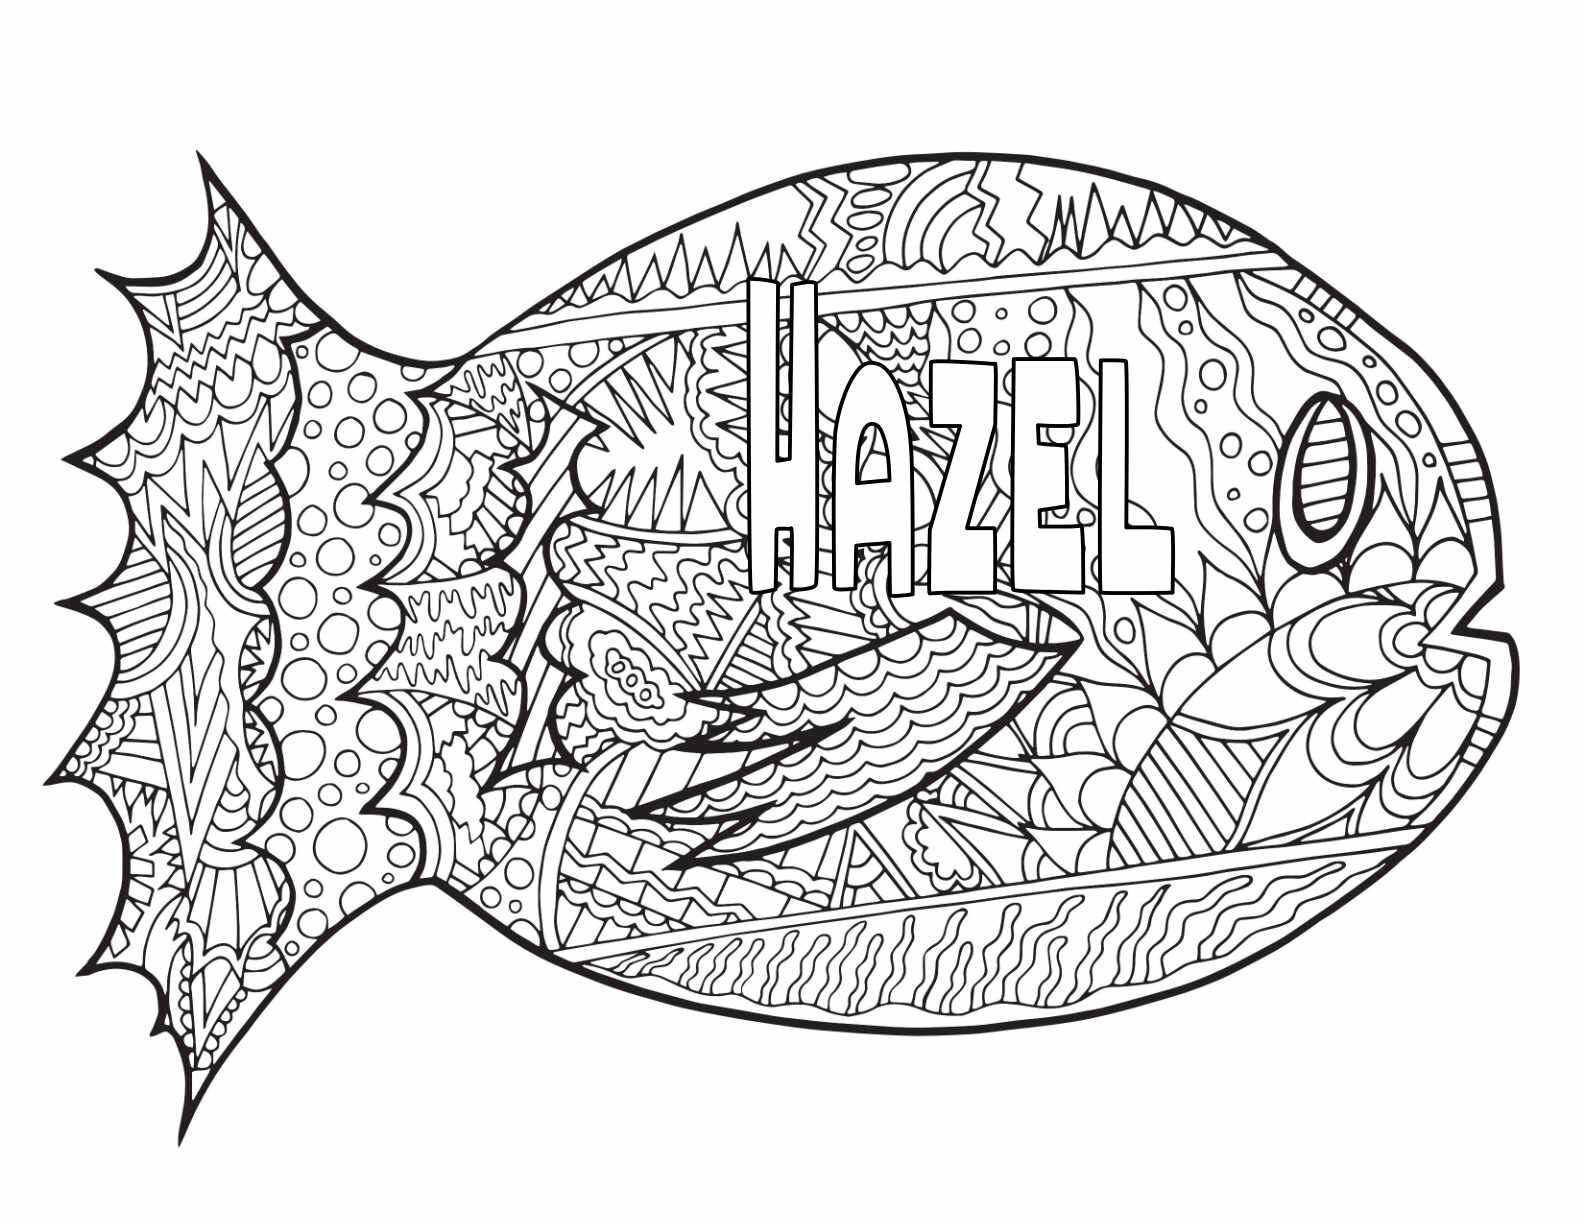 10 Free Printable HAZEL Coloring Pages!CLICK HERE TO DOWNLOAD THE COLORING PAGE ABOVE